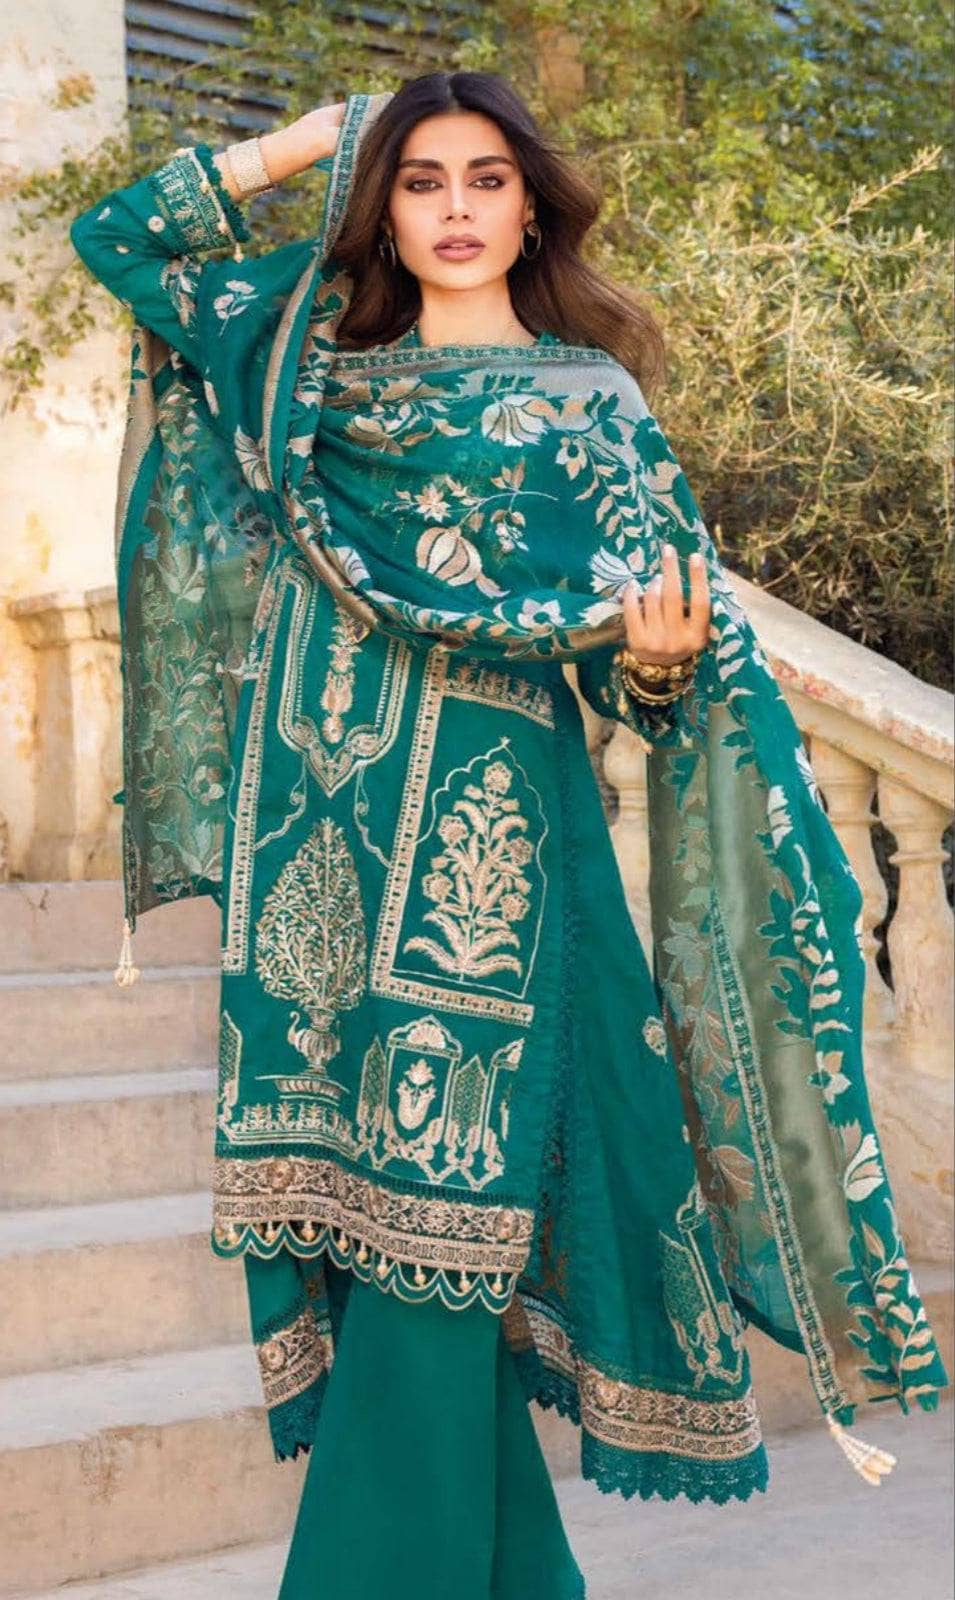 Luxury Chiffon Lawn Suits - Gul Ahmed Latest Summer Embroidered Lawn Dresses  Collection (4) - StylesGap.com